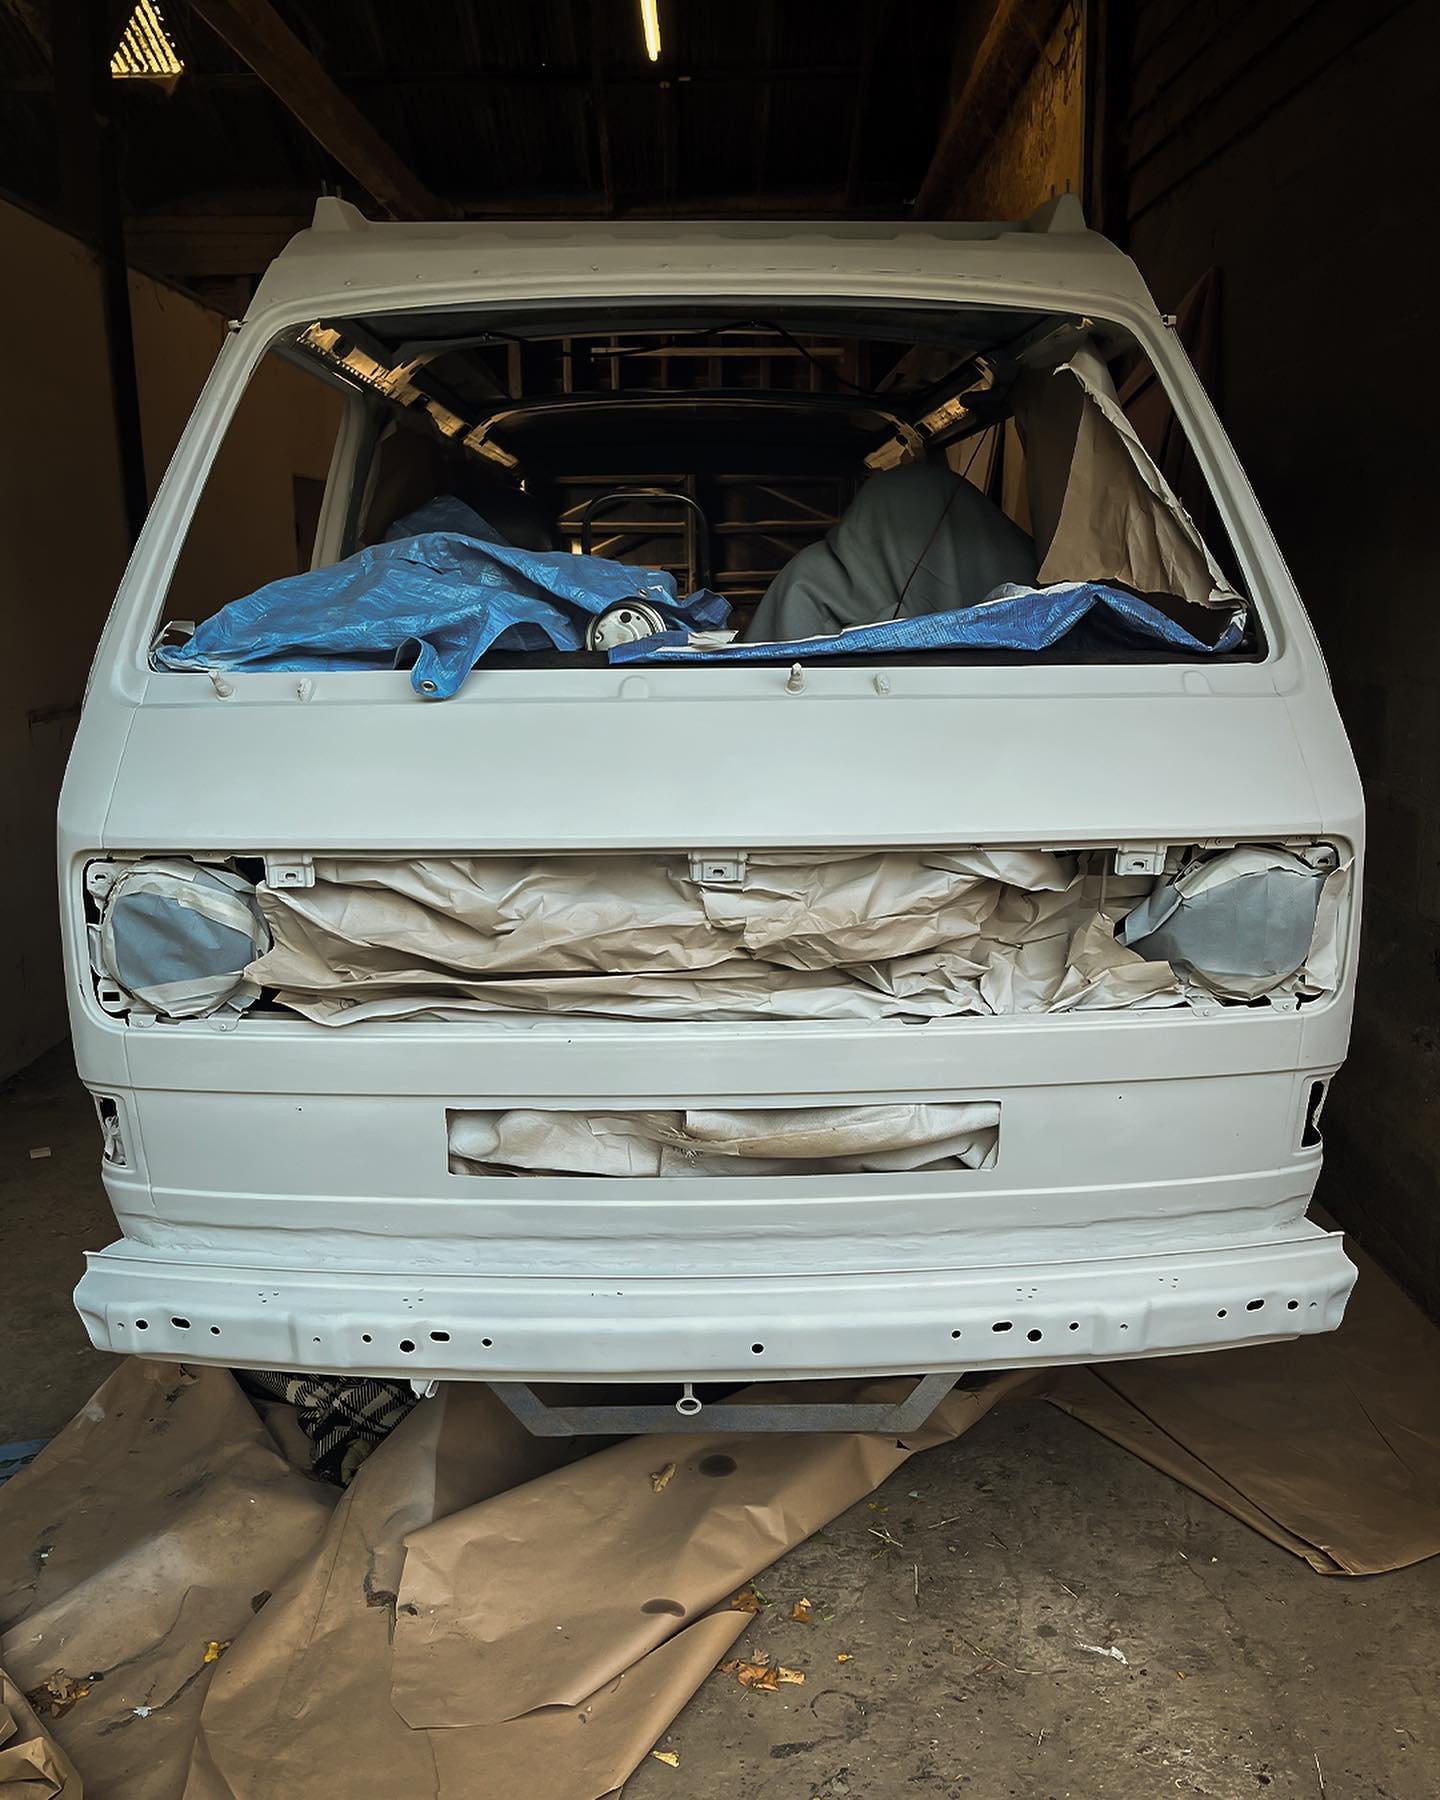 Apologies for the lack of Van update have been busy painting it, just got to cut and buff the paintwork and then putting it all back together so I can get it on the road! 😃 This is after the van had all been primered&hellip; photo to come soon of it